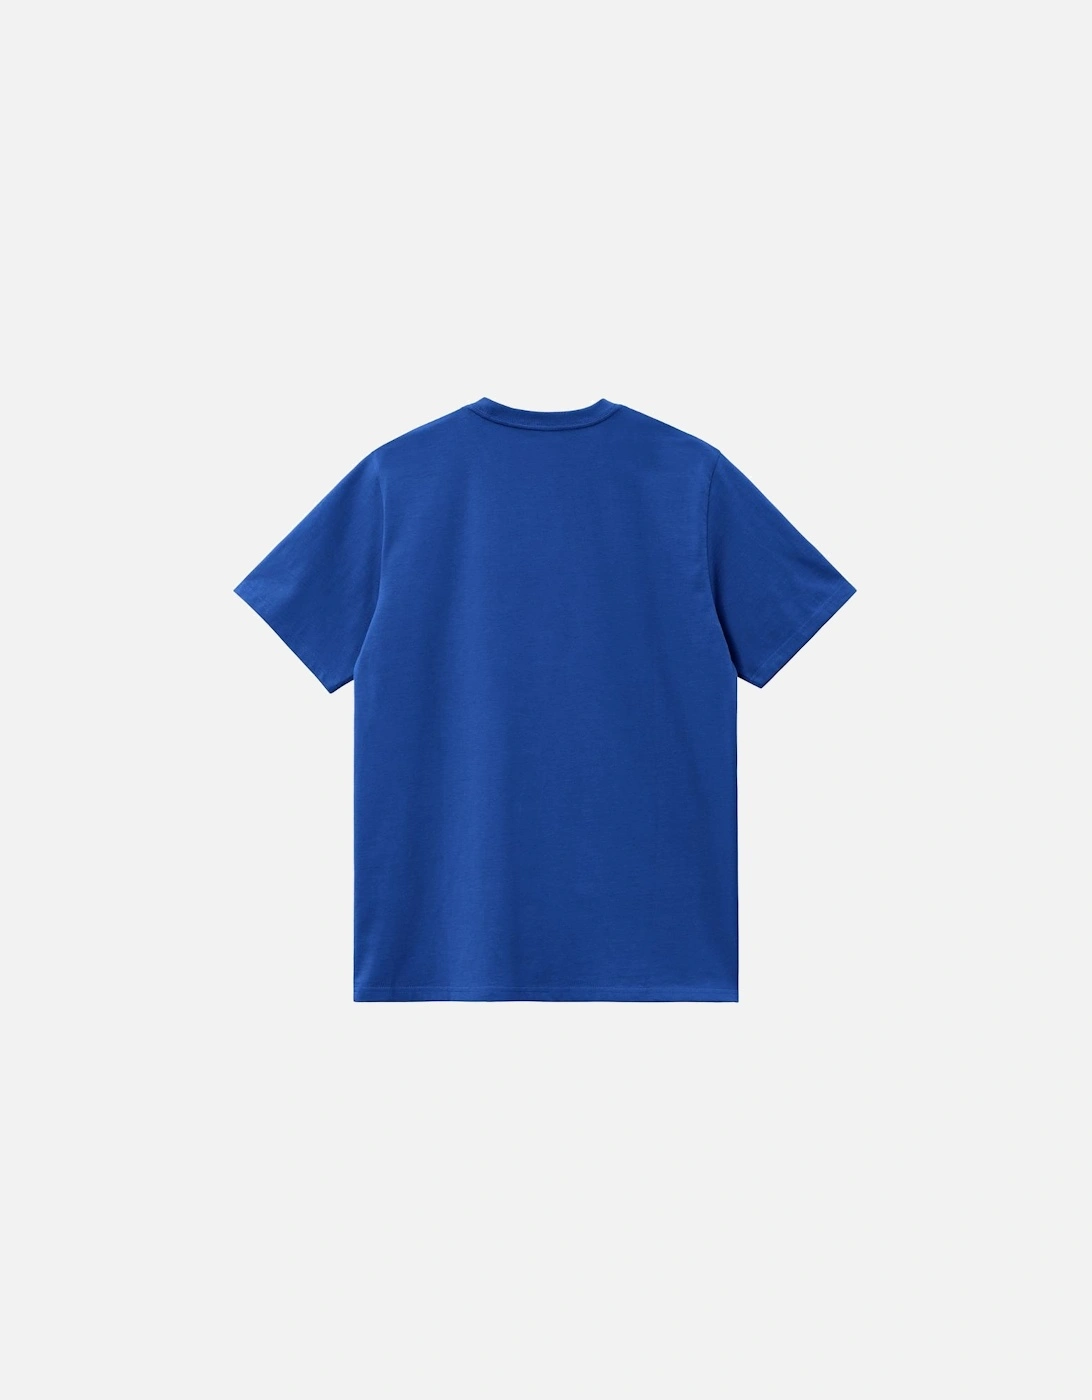 S/S Chase T-Shirt - Acapulco